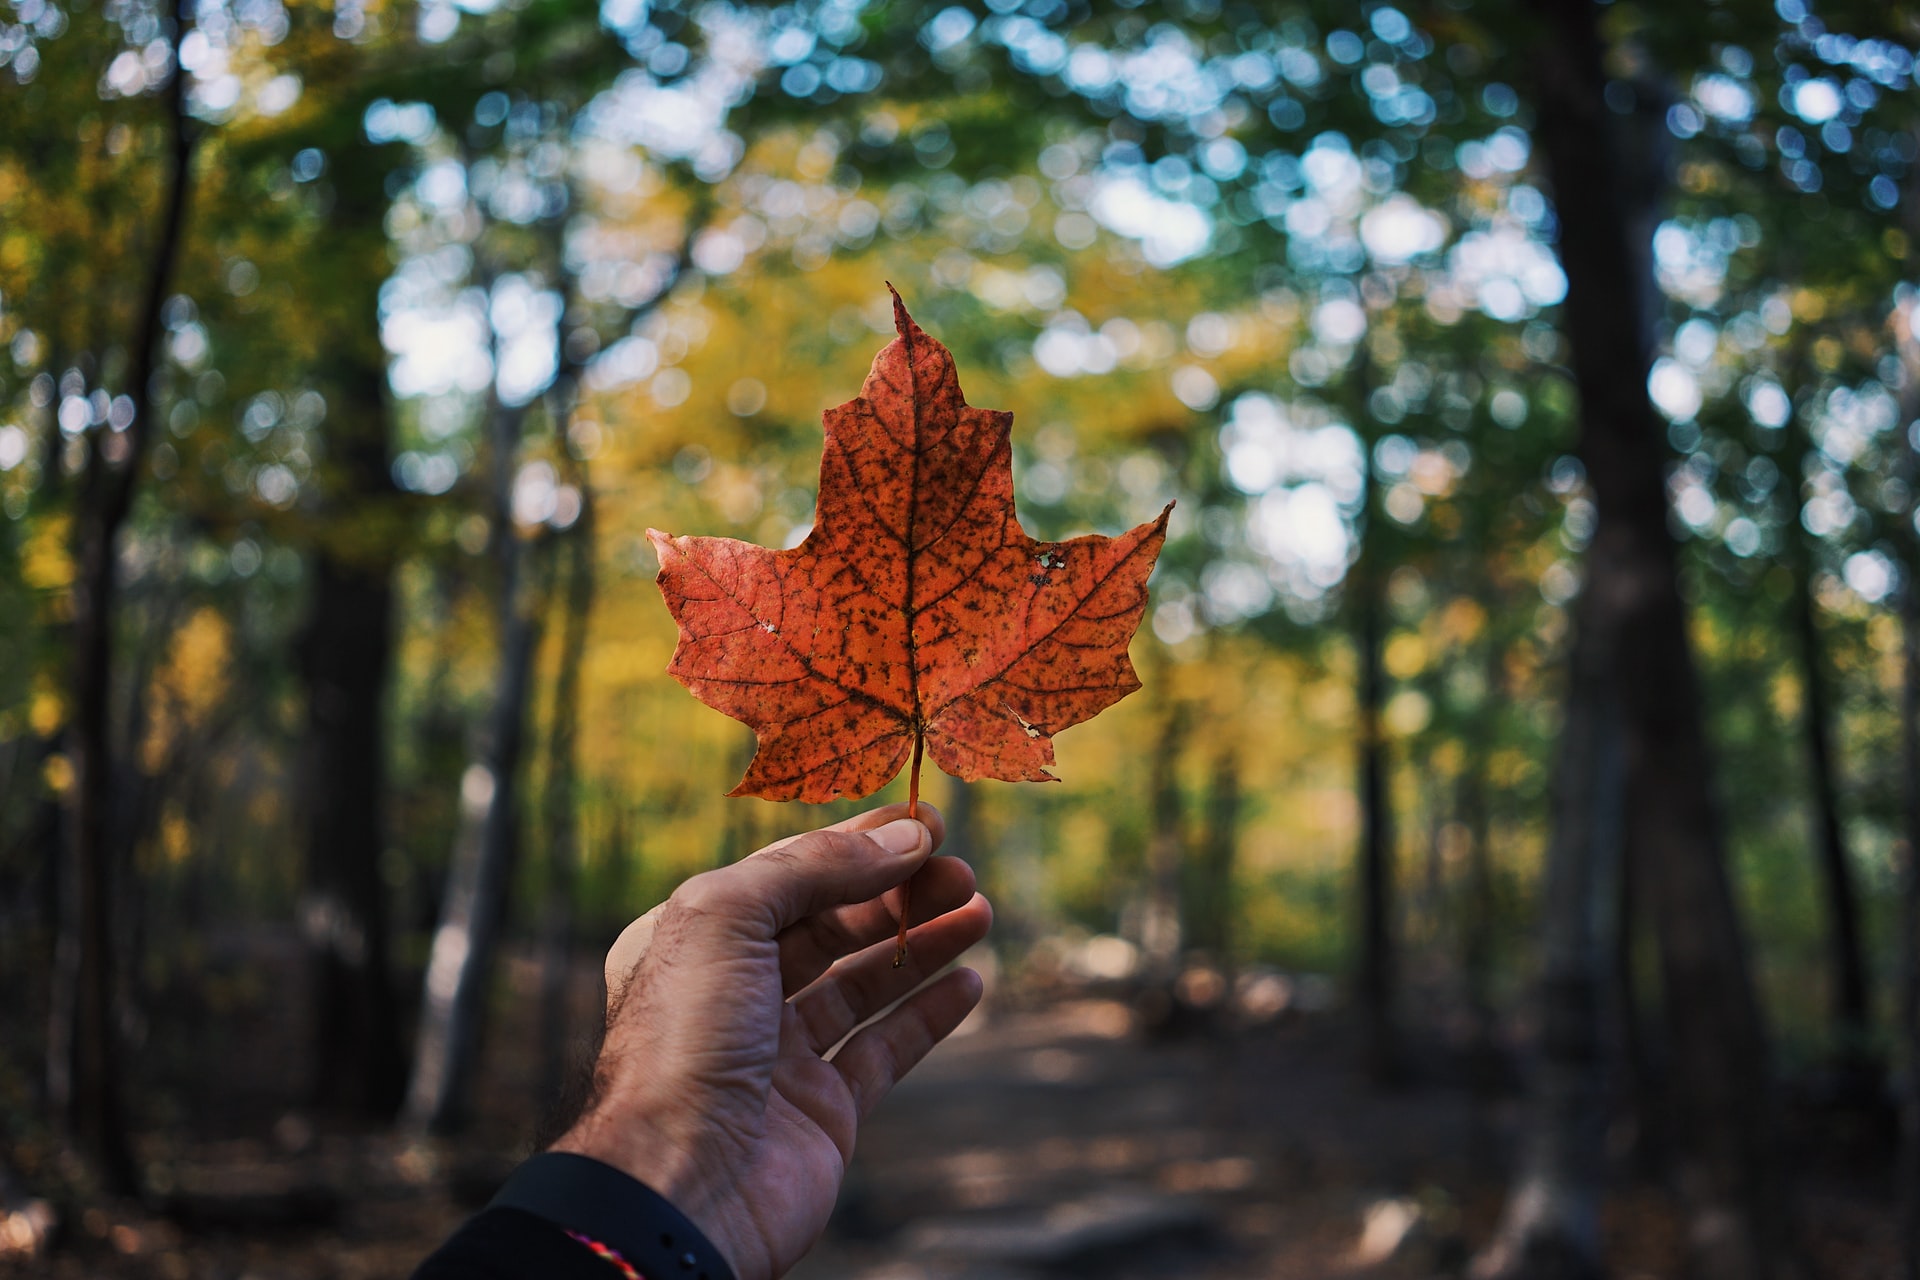 A person holding a red maple leaf, a symbol of Canada and immigration aspirations through IRCC.